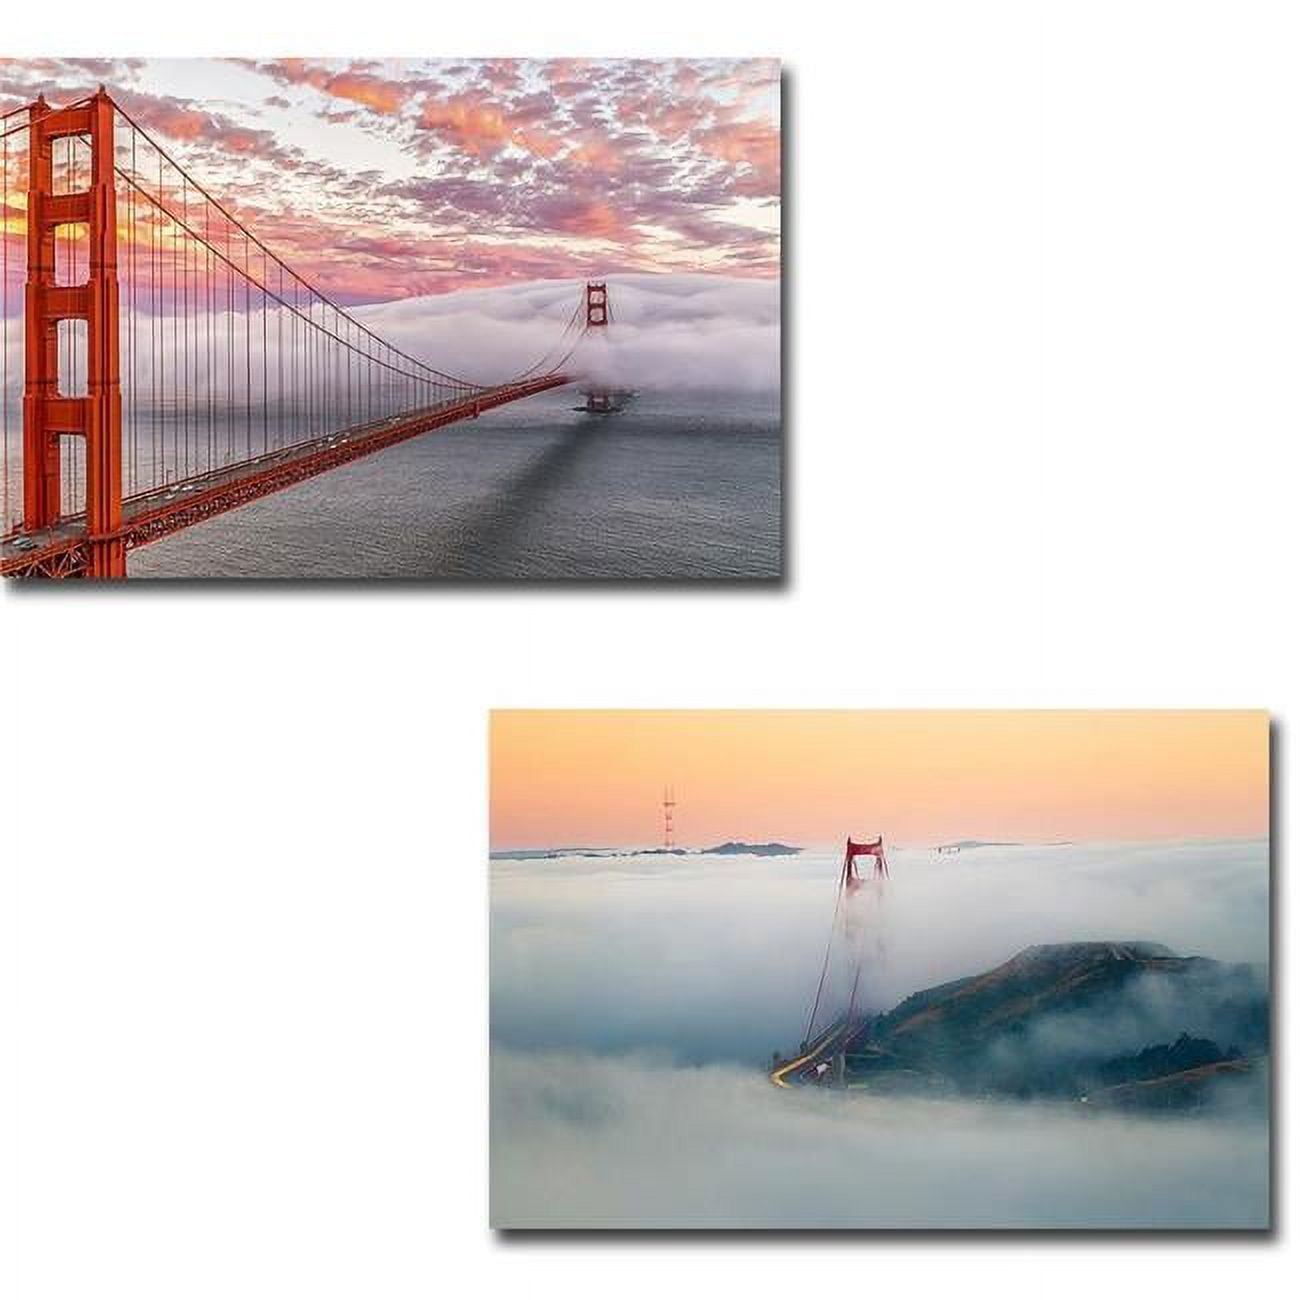 1218g278ig Evening Commute & Breakthrough By Dave Gordon 2-piece Premium Gallery Wrapped Canvas Giclee Art Set - 12 X 18 X 1.5 In.